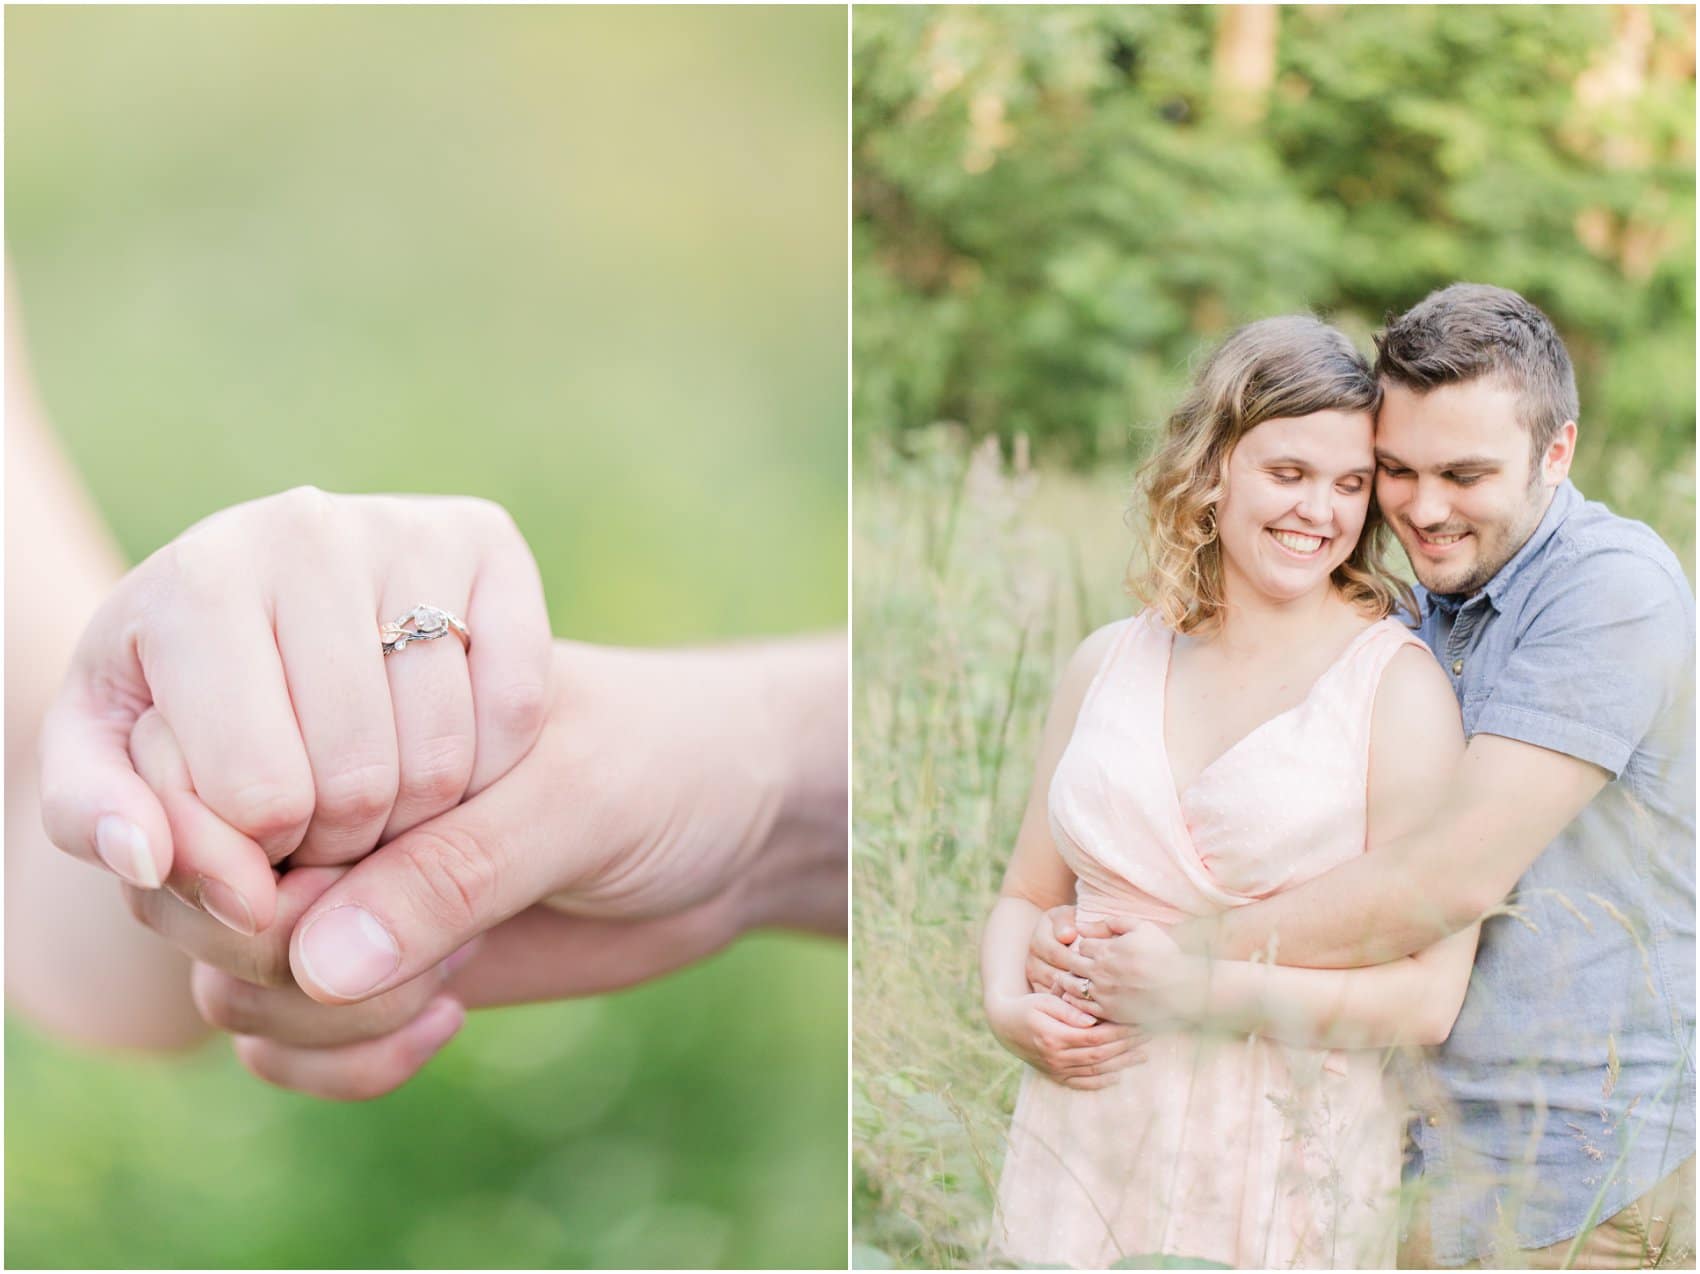 Engagement ring and love in the park in Surrey